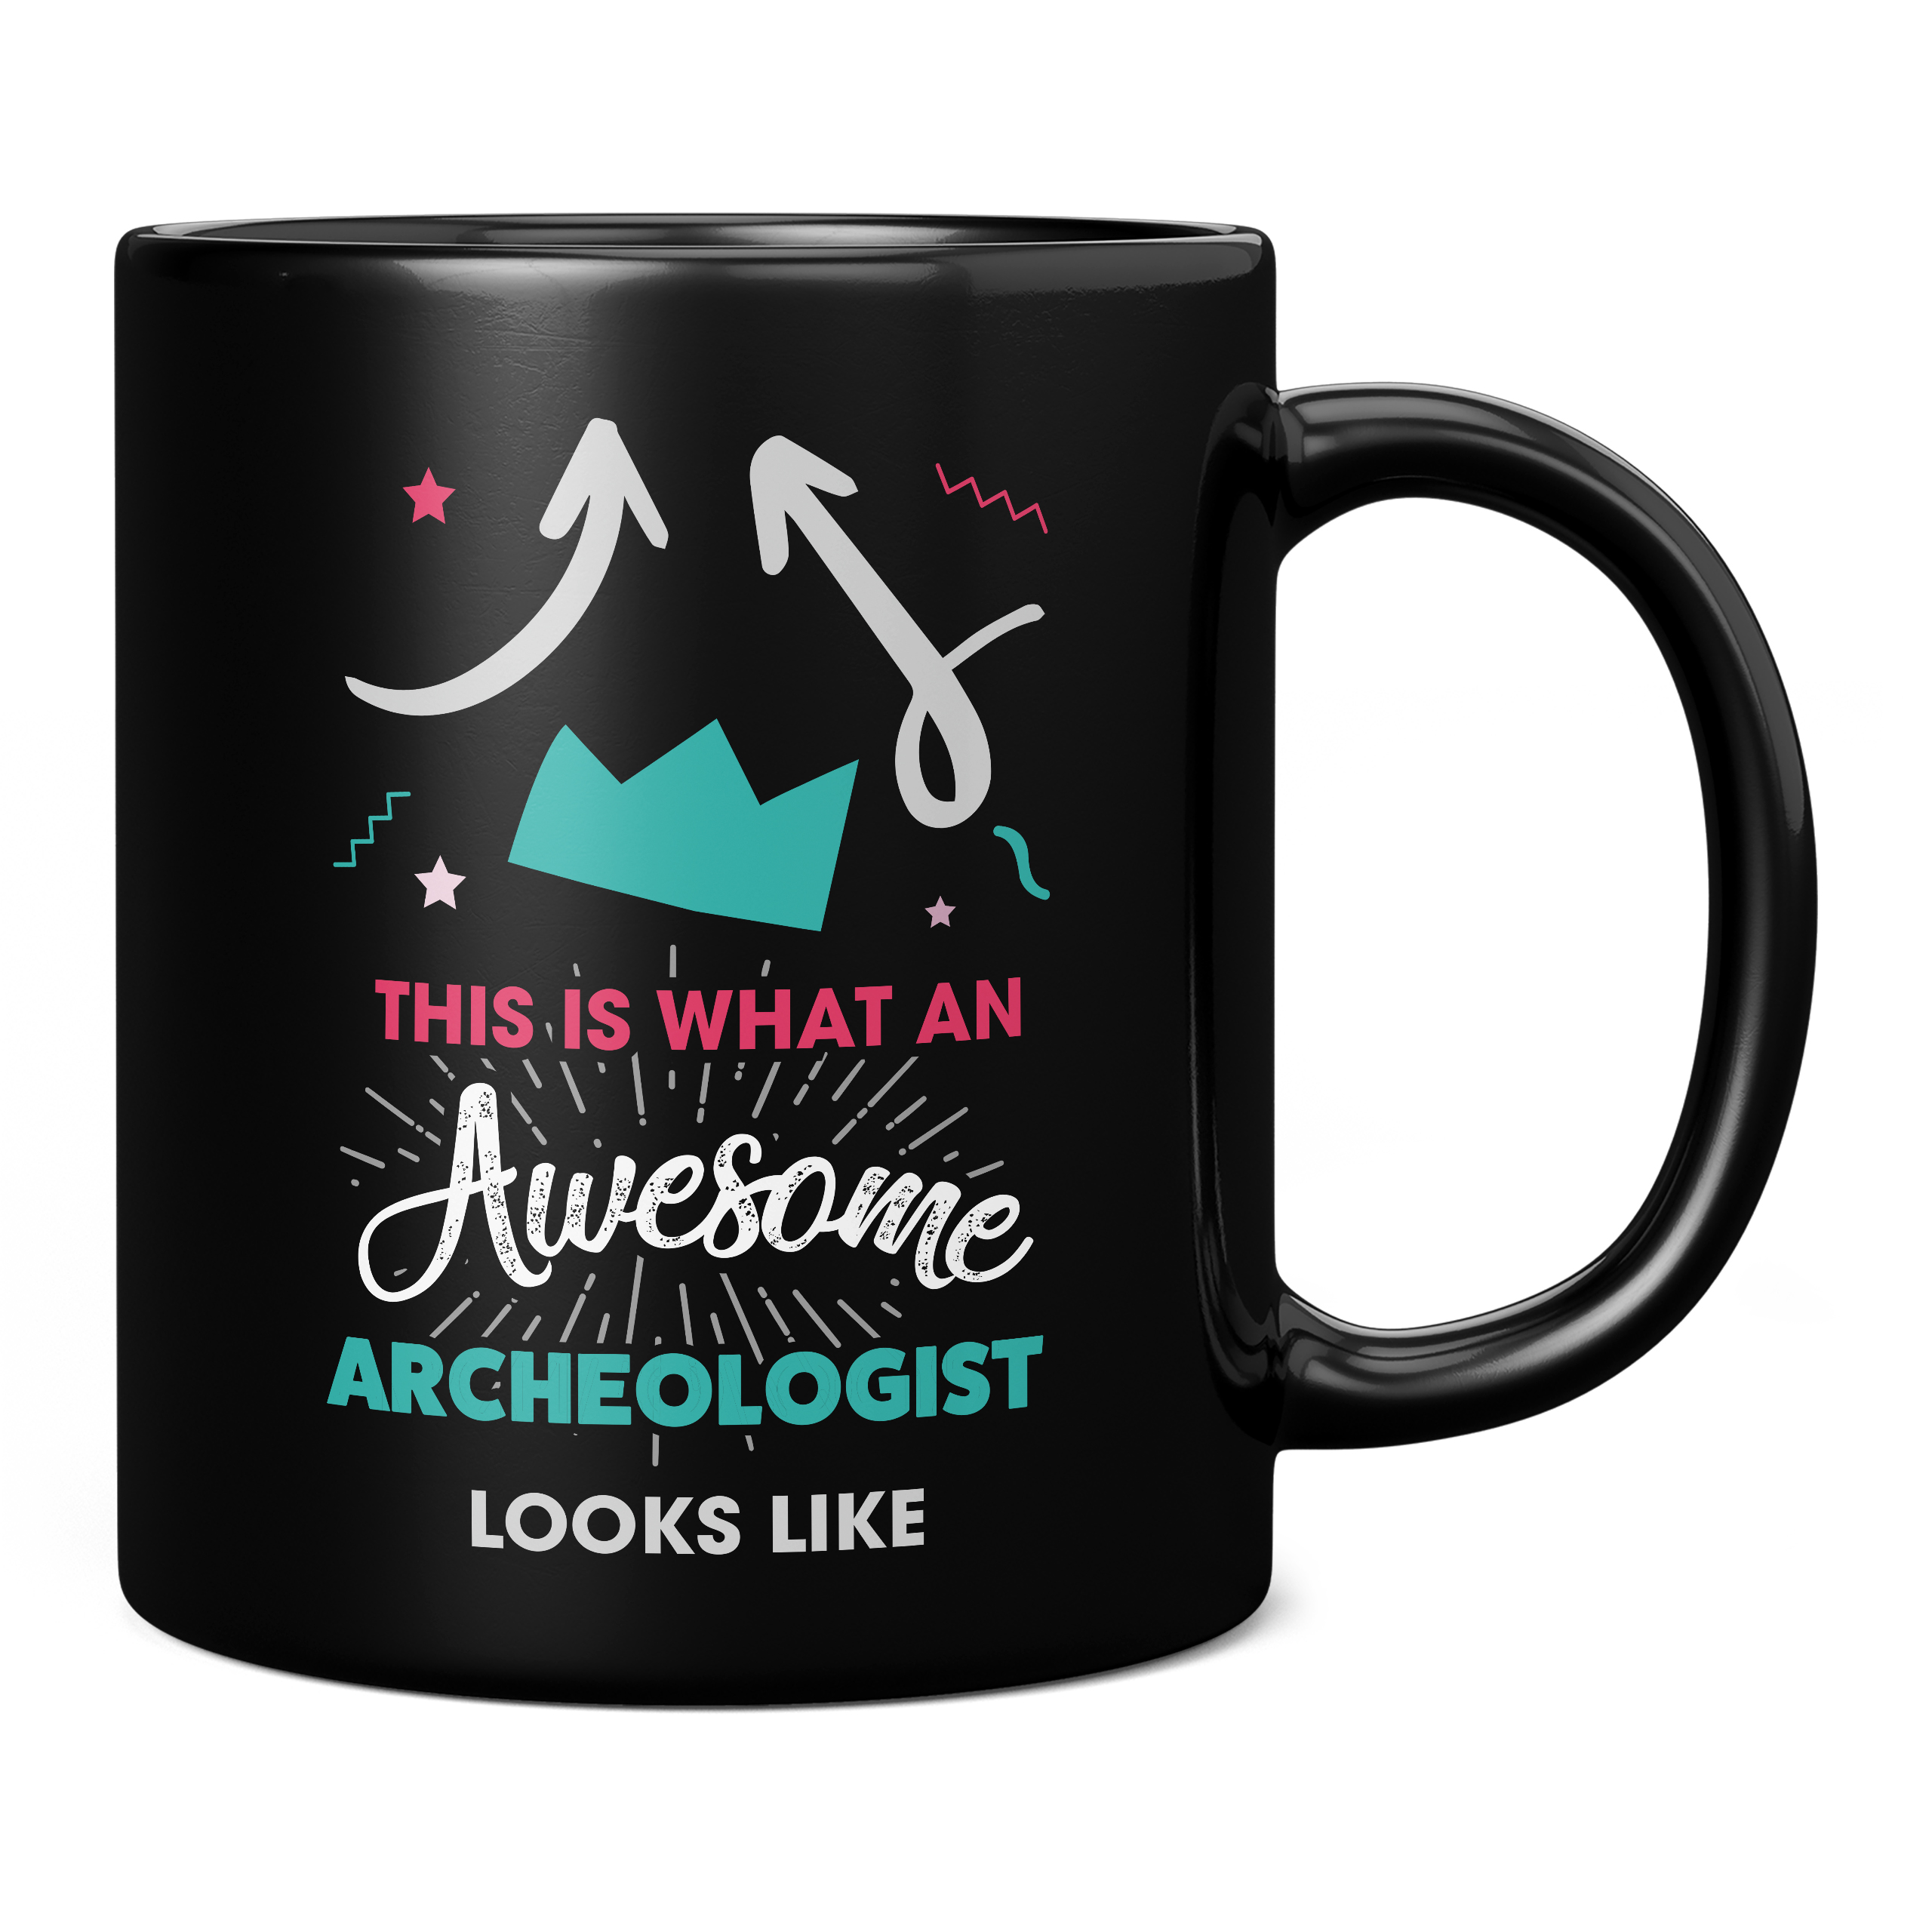 THIS IS WHAT AN AWESOME ARCHEOLOGIST LOOKS LIKE 11OZ NOVELTY MUG